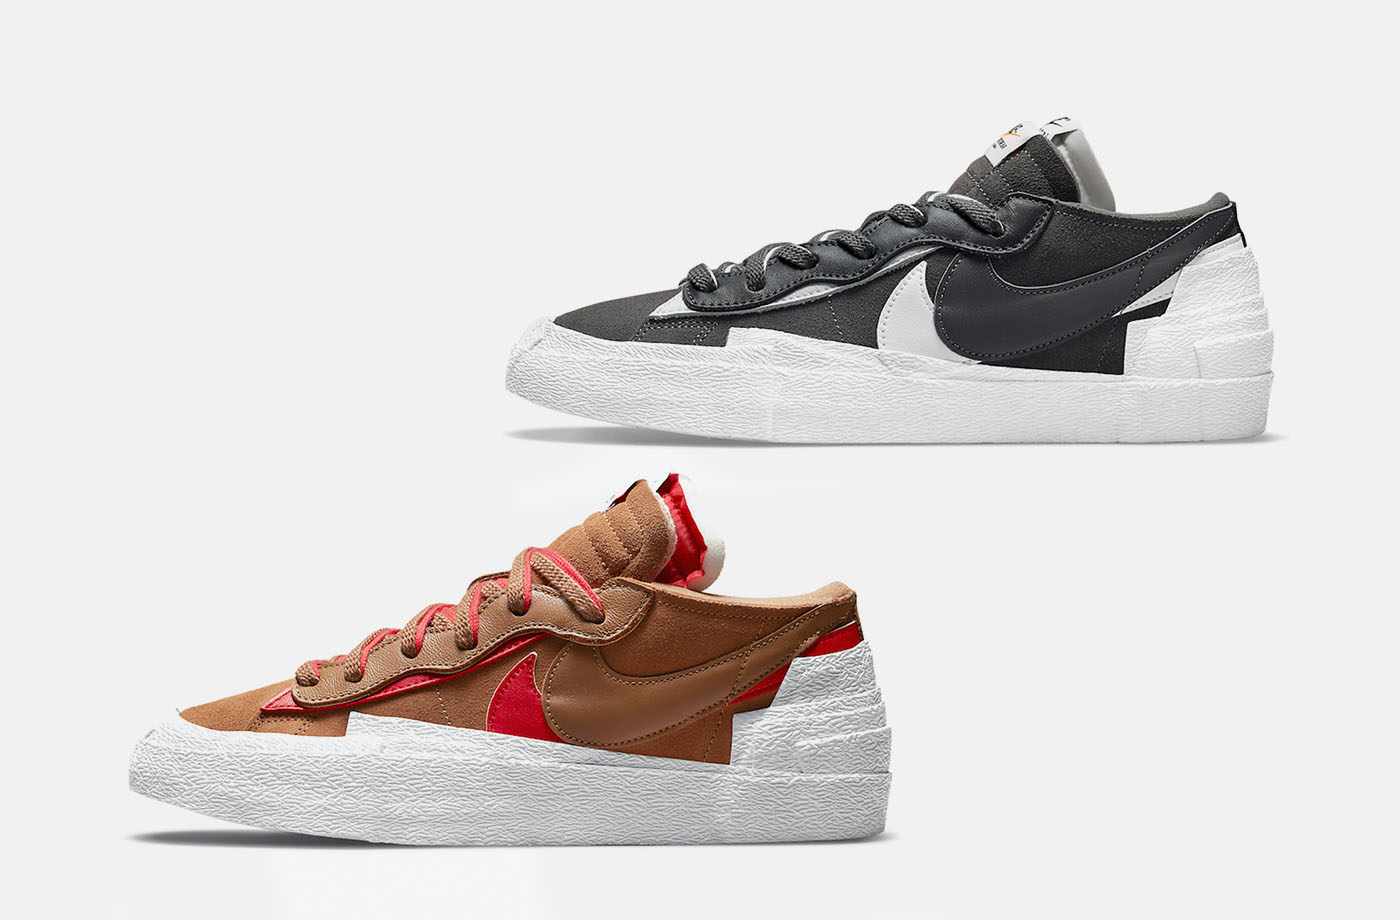 More sacai x Nike Blazer Lows are Arriving This Summer | SoleSavy News